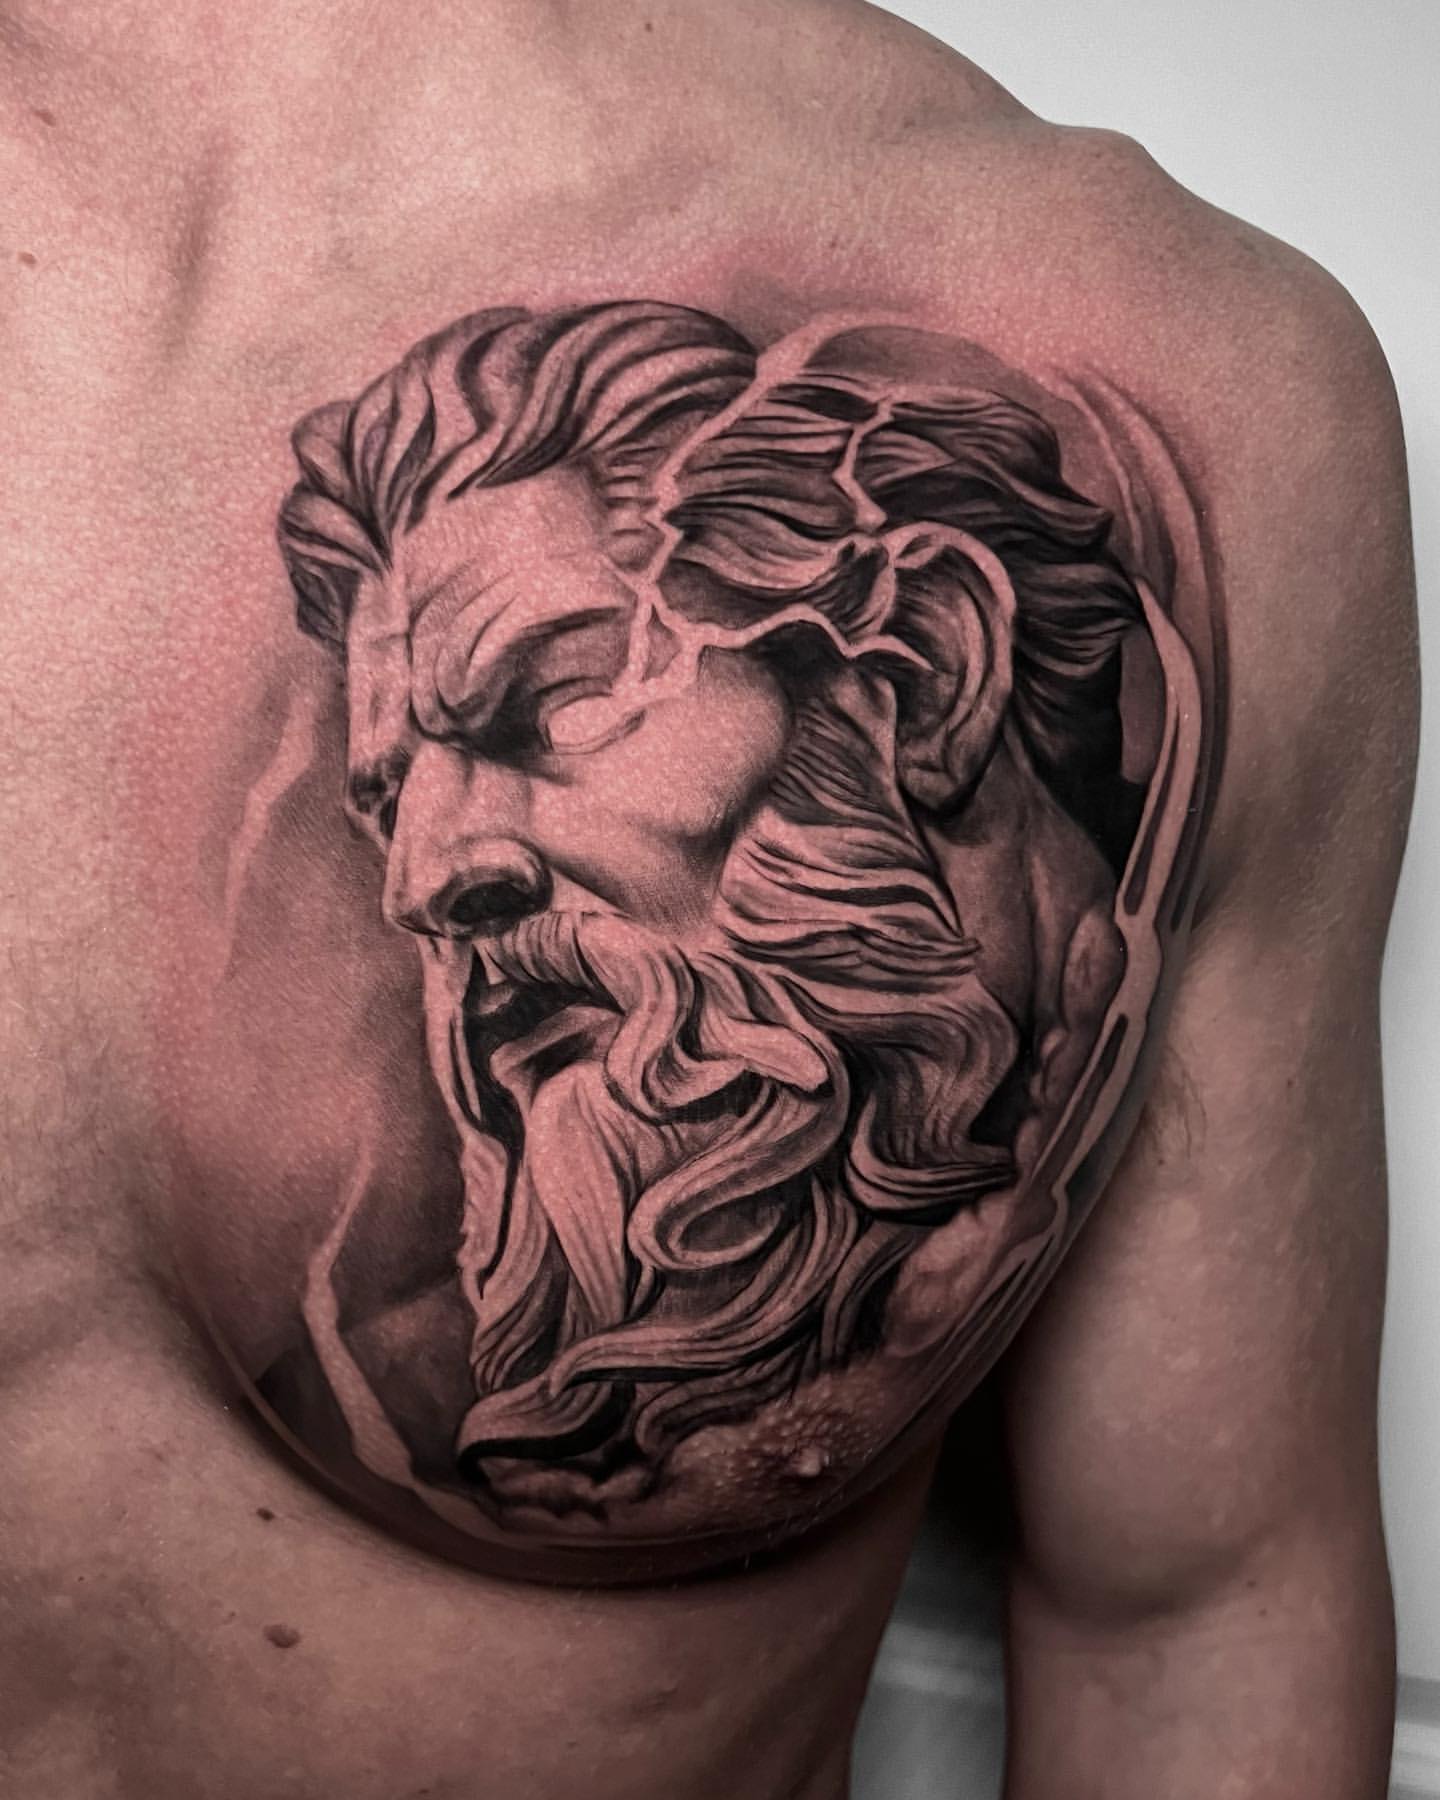 Zeus Tattoo Meaning: Power, Wisdom, and Authority | Art and Design